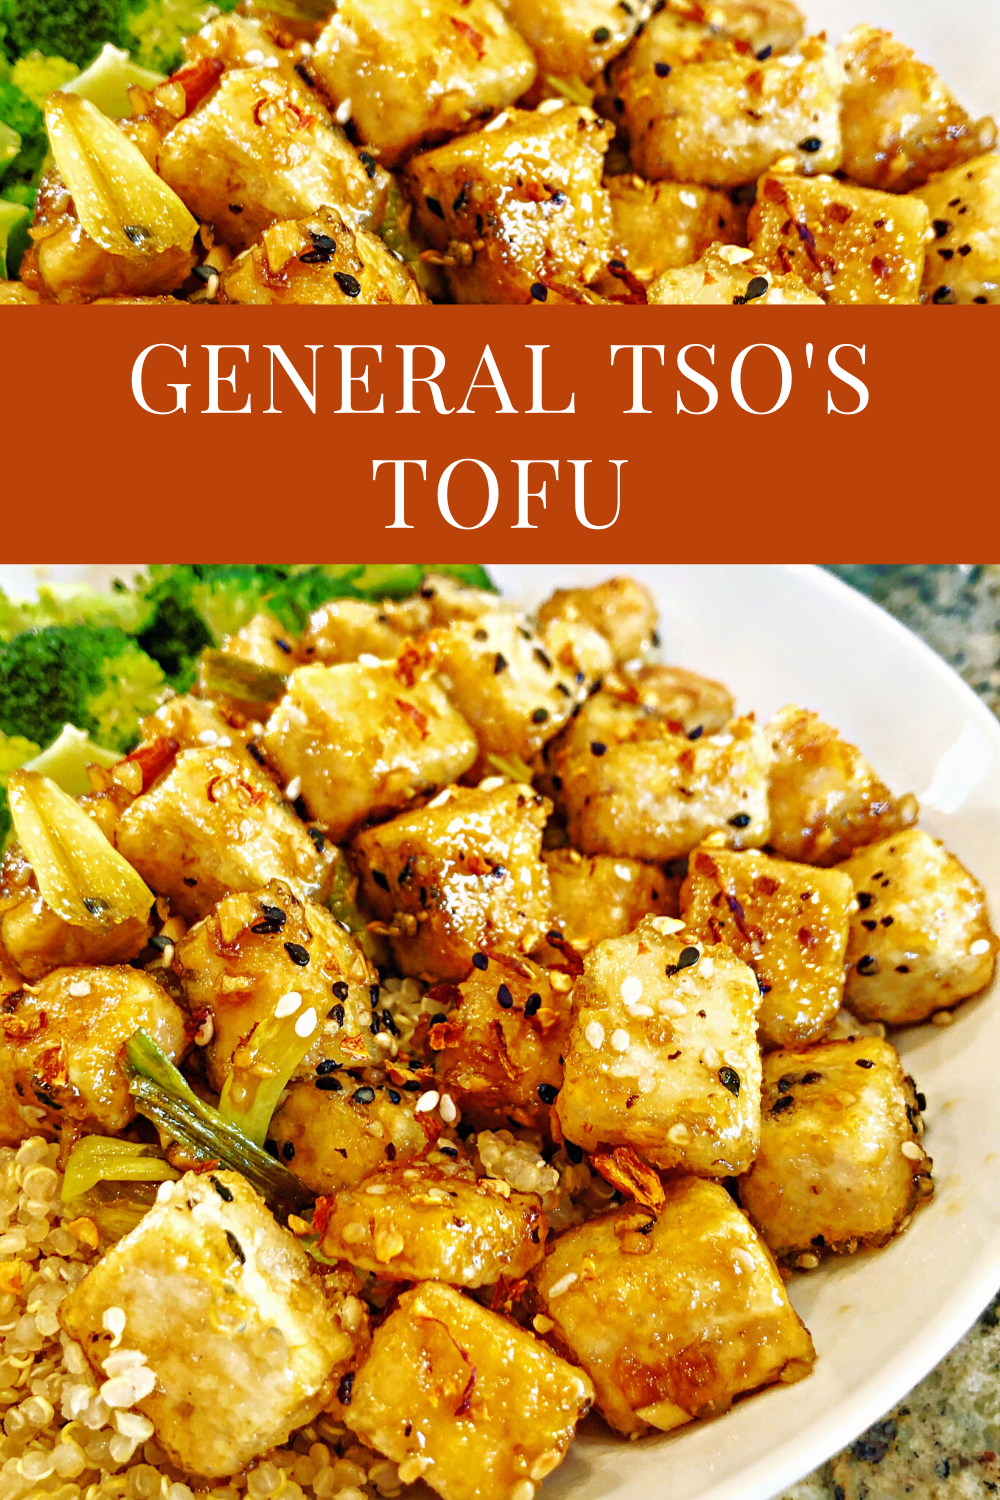 General Tso's crispy pan-fried tofu tossed in a sweet garlic and ginger sauce. Super easy and ready to serve in less time than it takes to get takeout! via @thiswifecooks